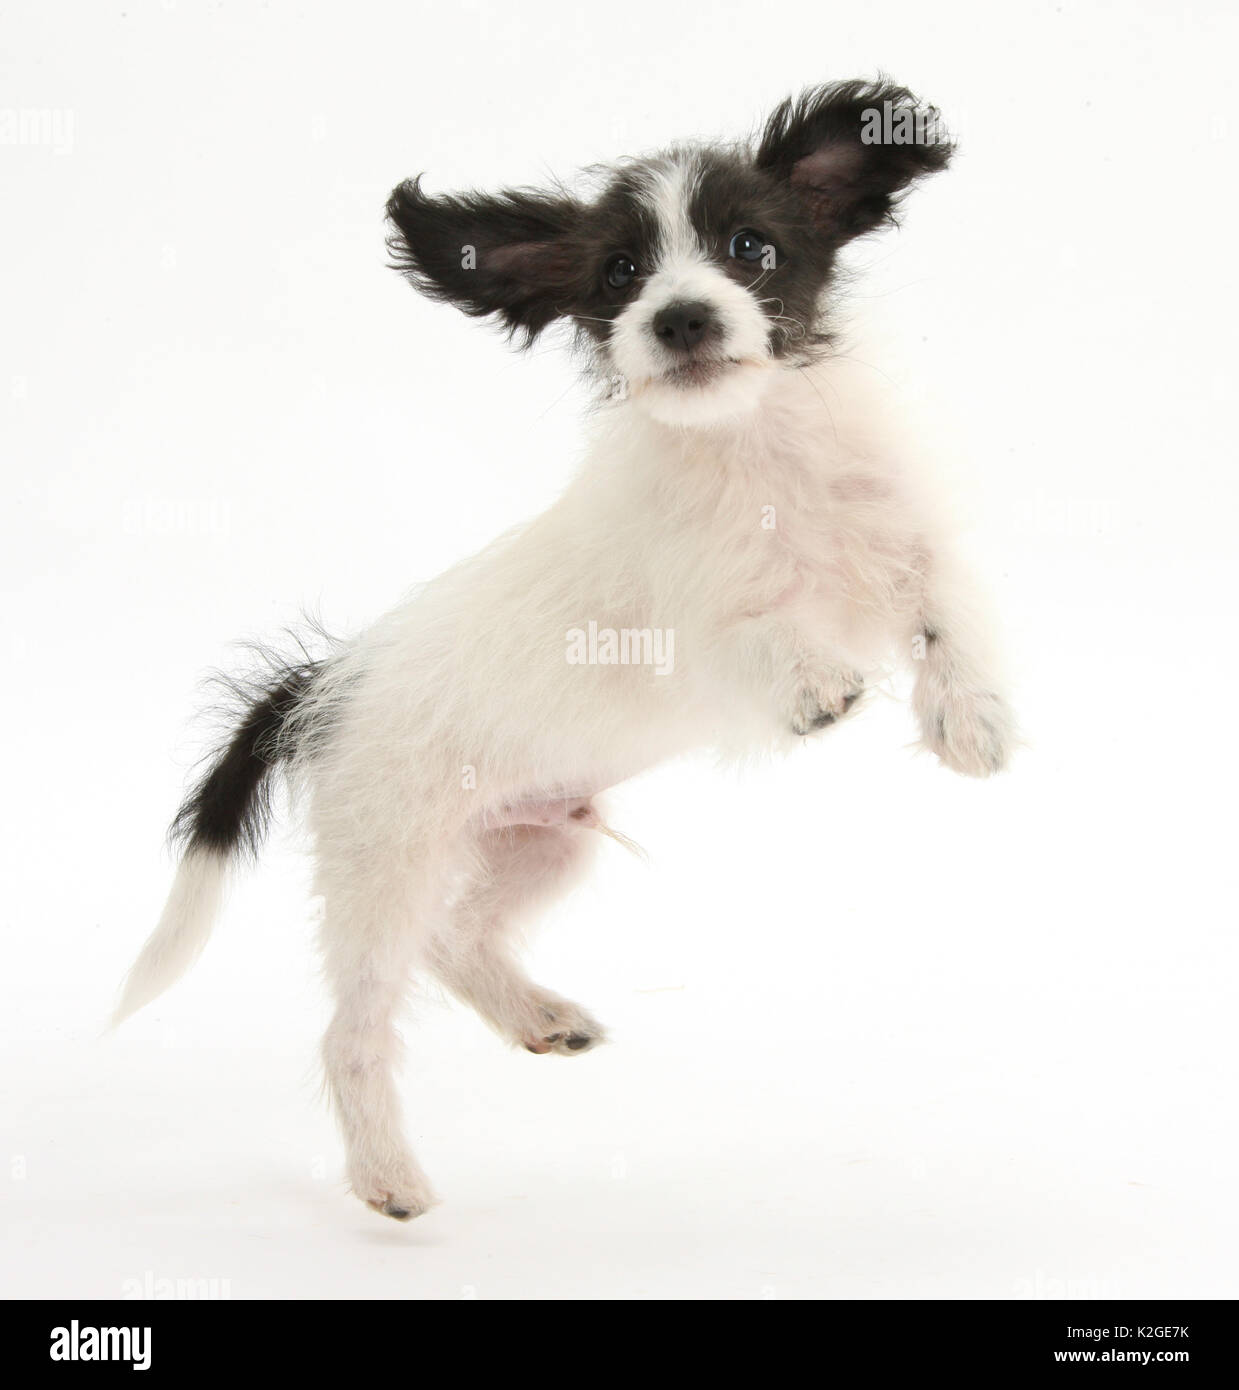 Black and white Jack-a-poo, Jack Russell cross Poodle, pup, 8 weeks old, jumping up. Stock Photo